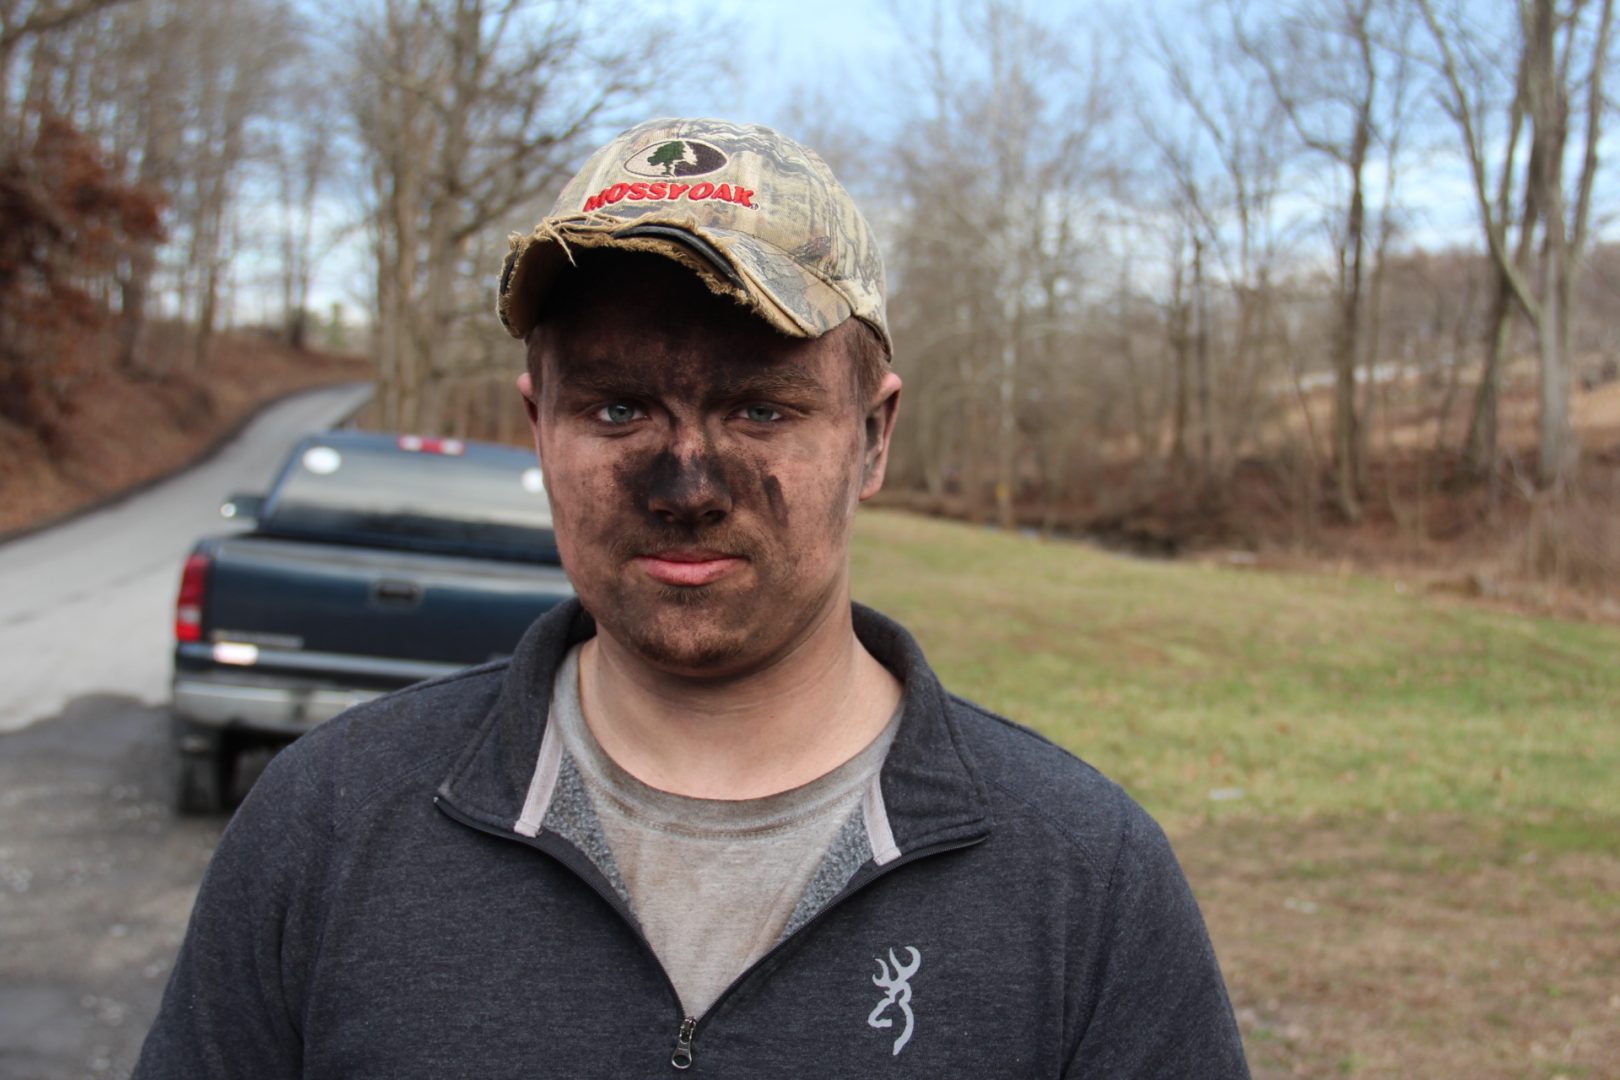 Austin Turner, 19, of Gladesville, W. Va. is one of 370 miners getting laid off at the 4 West Mine in Mt. Morris, Pa. 